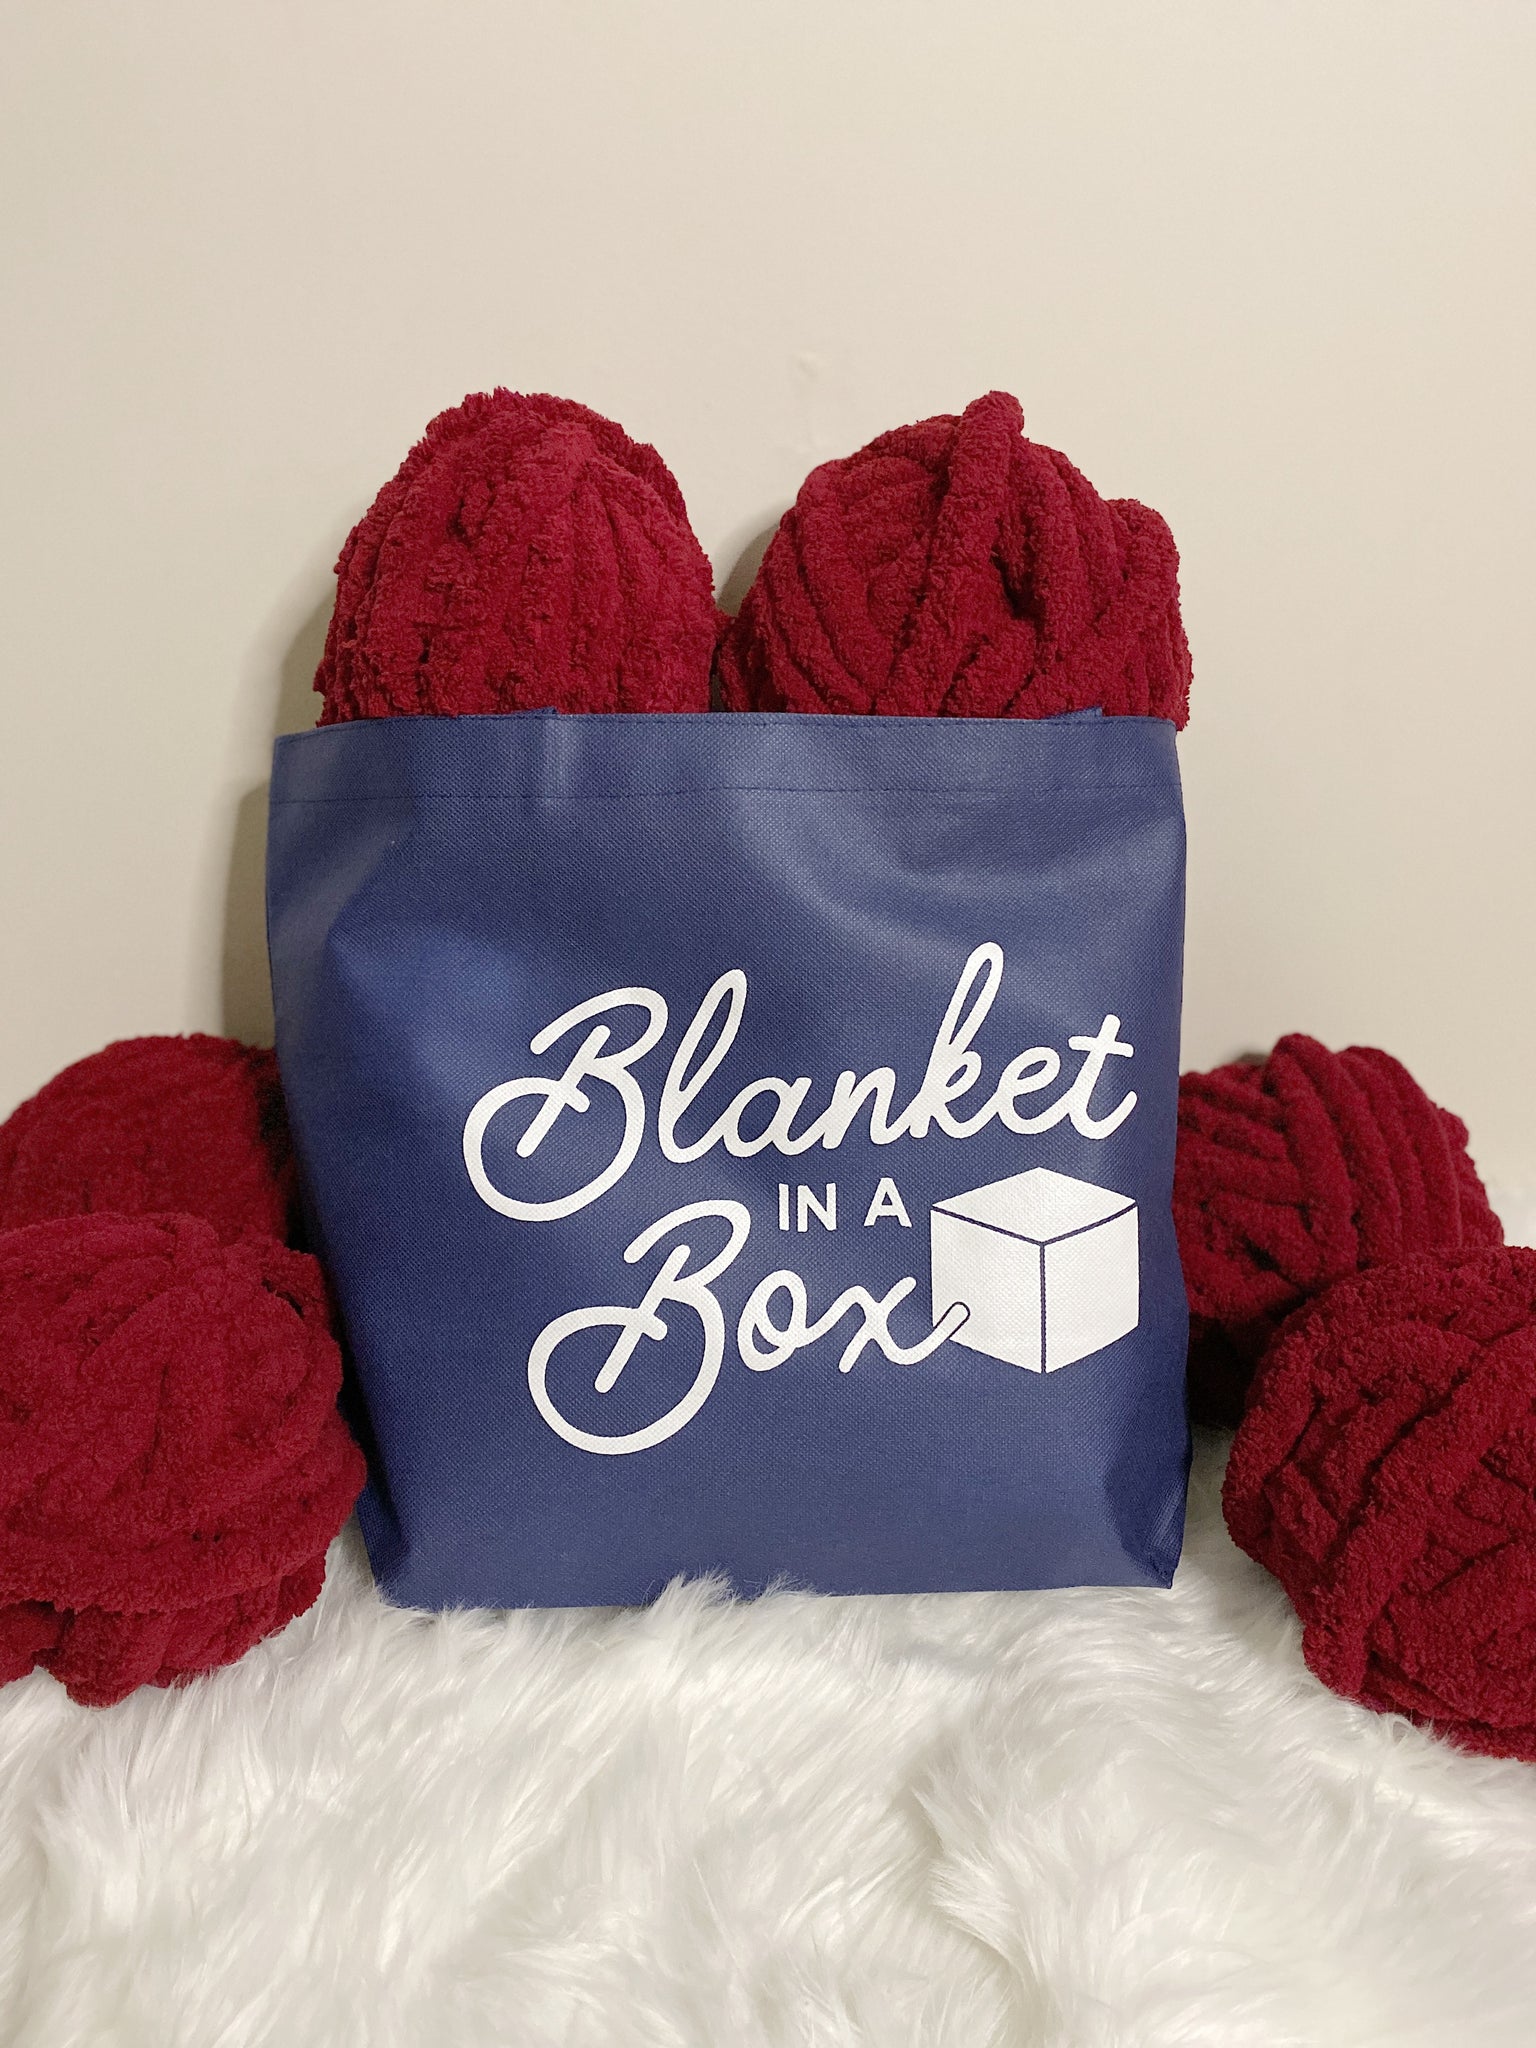 DIY Chunky Knit Blanket, Online class & kit, Gifts